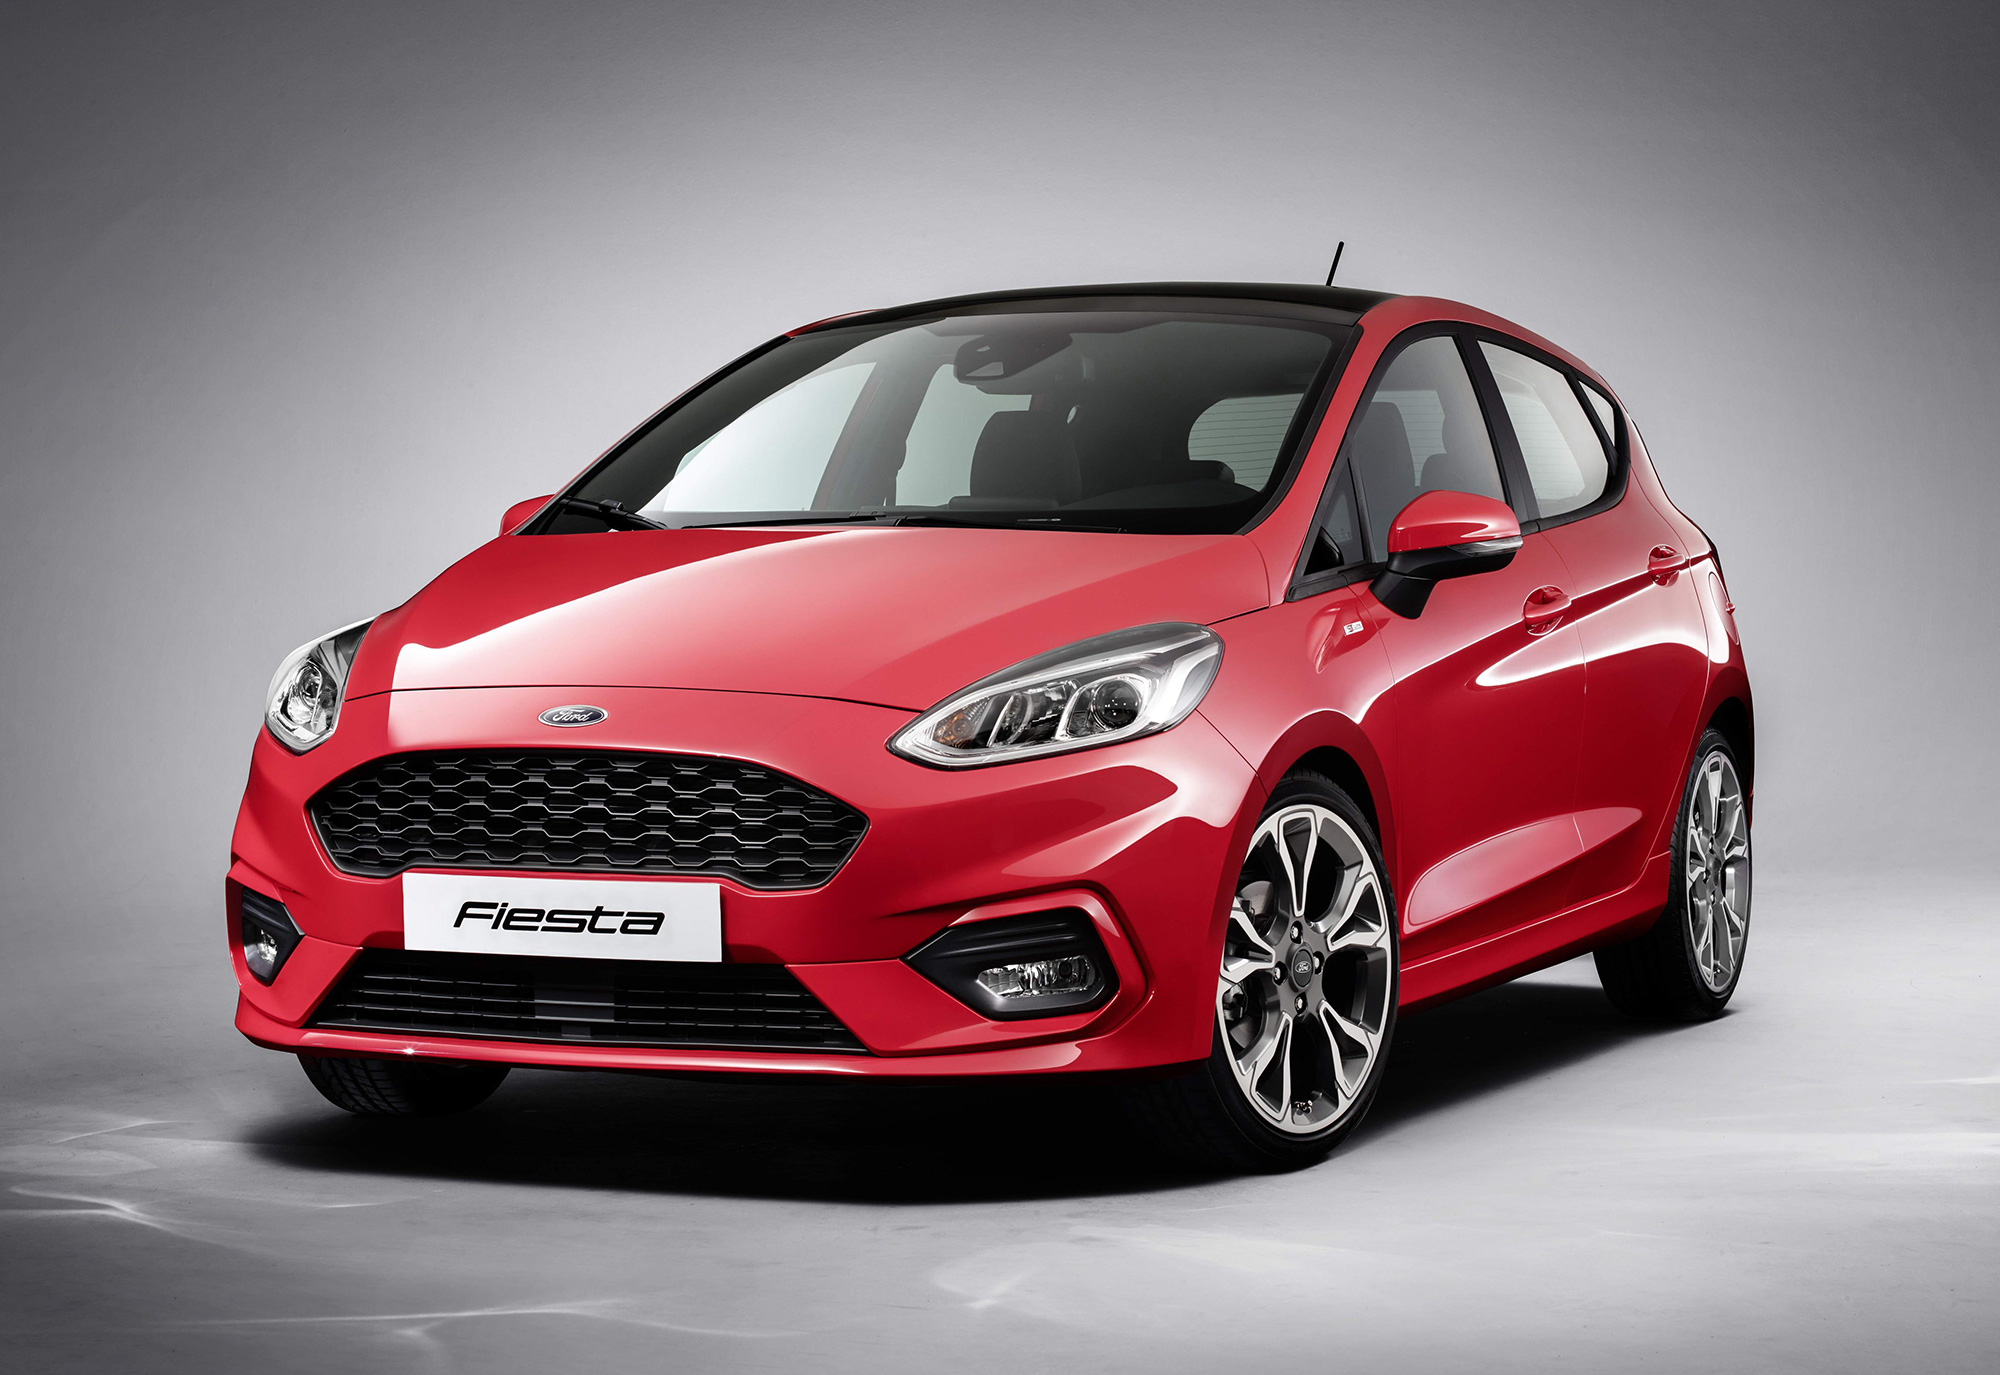 The-Ford-Fiesta-makes-its-UK-debut-at-Goodwood-FoS.jpg